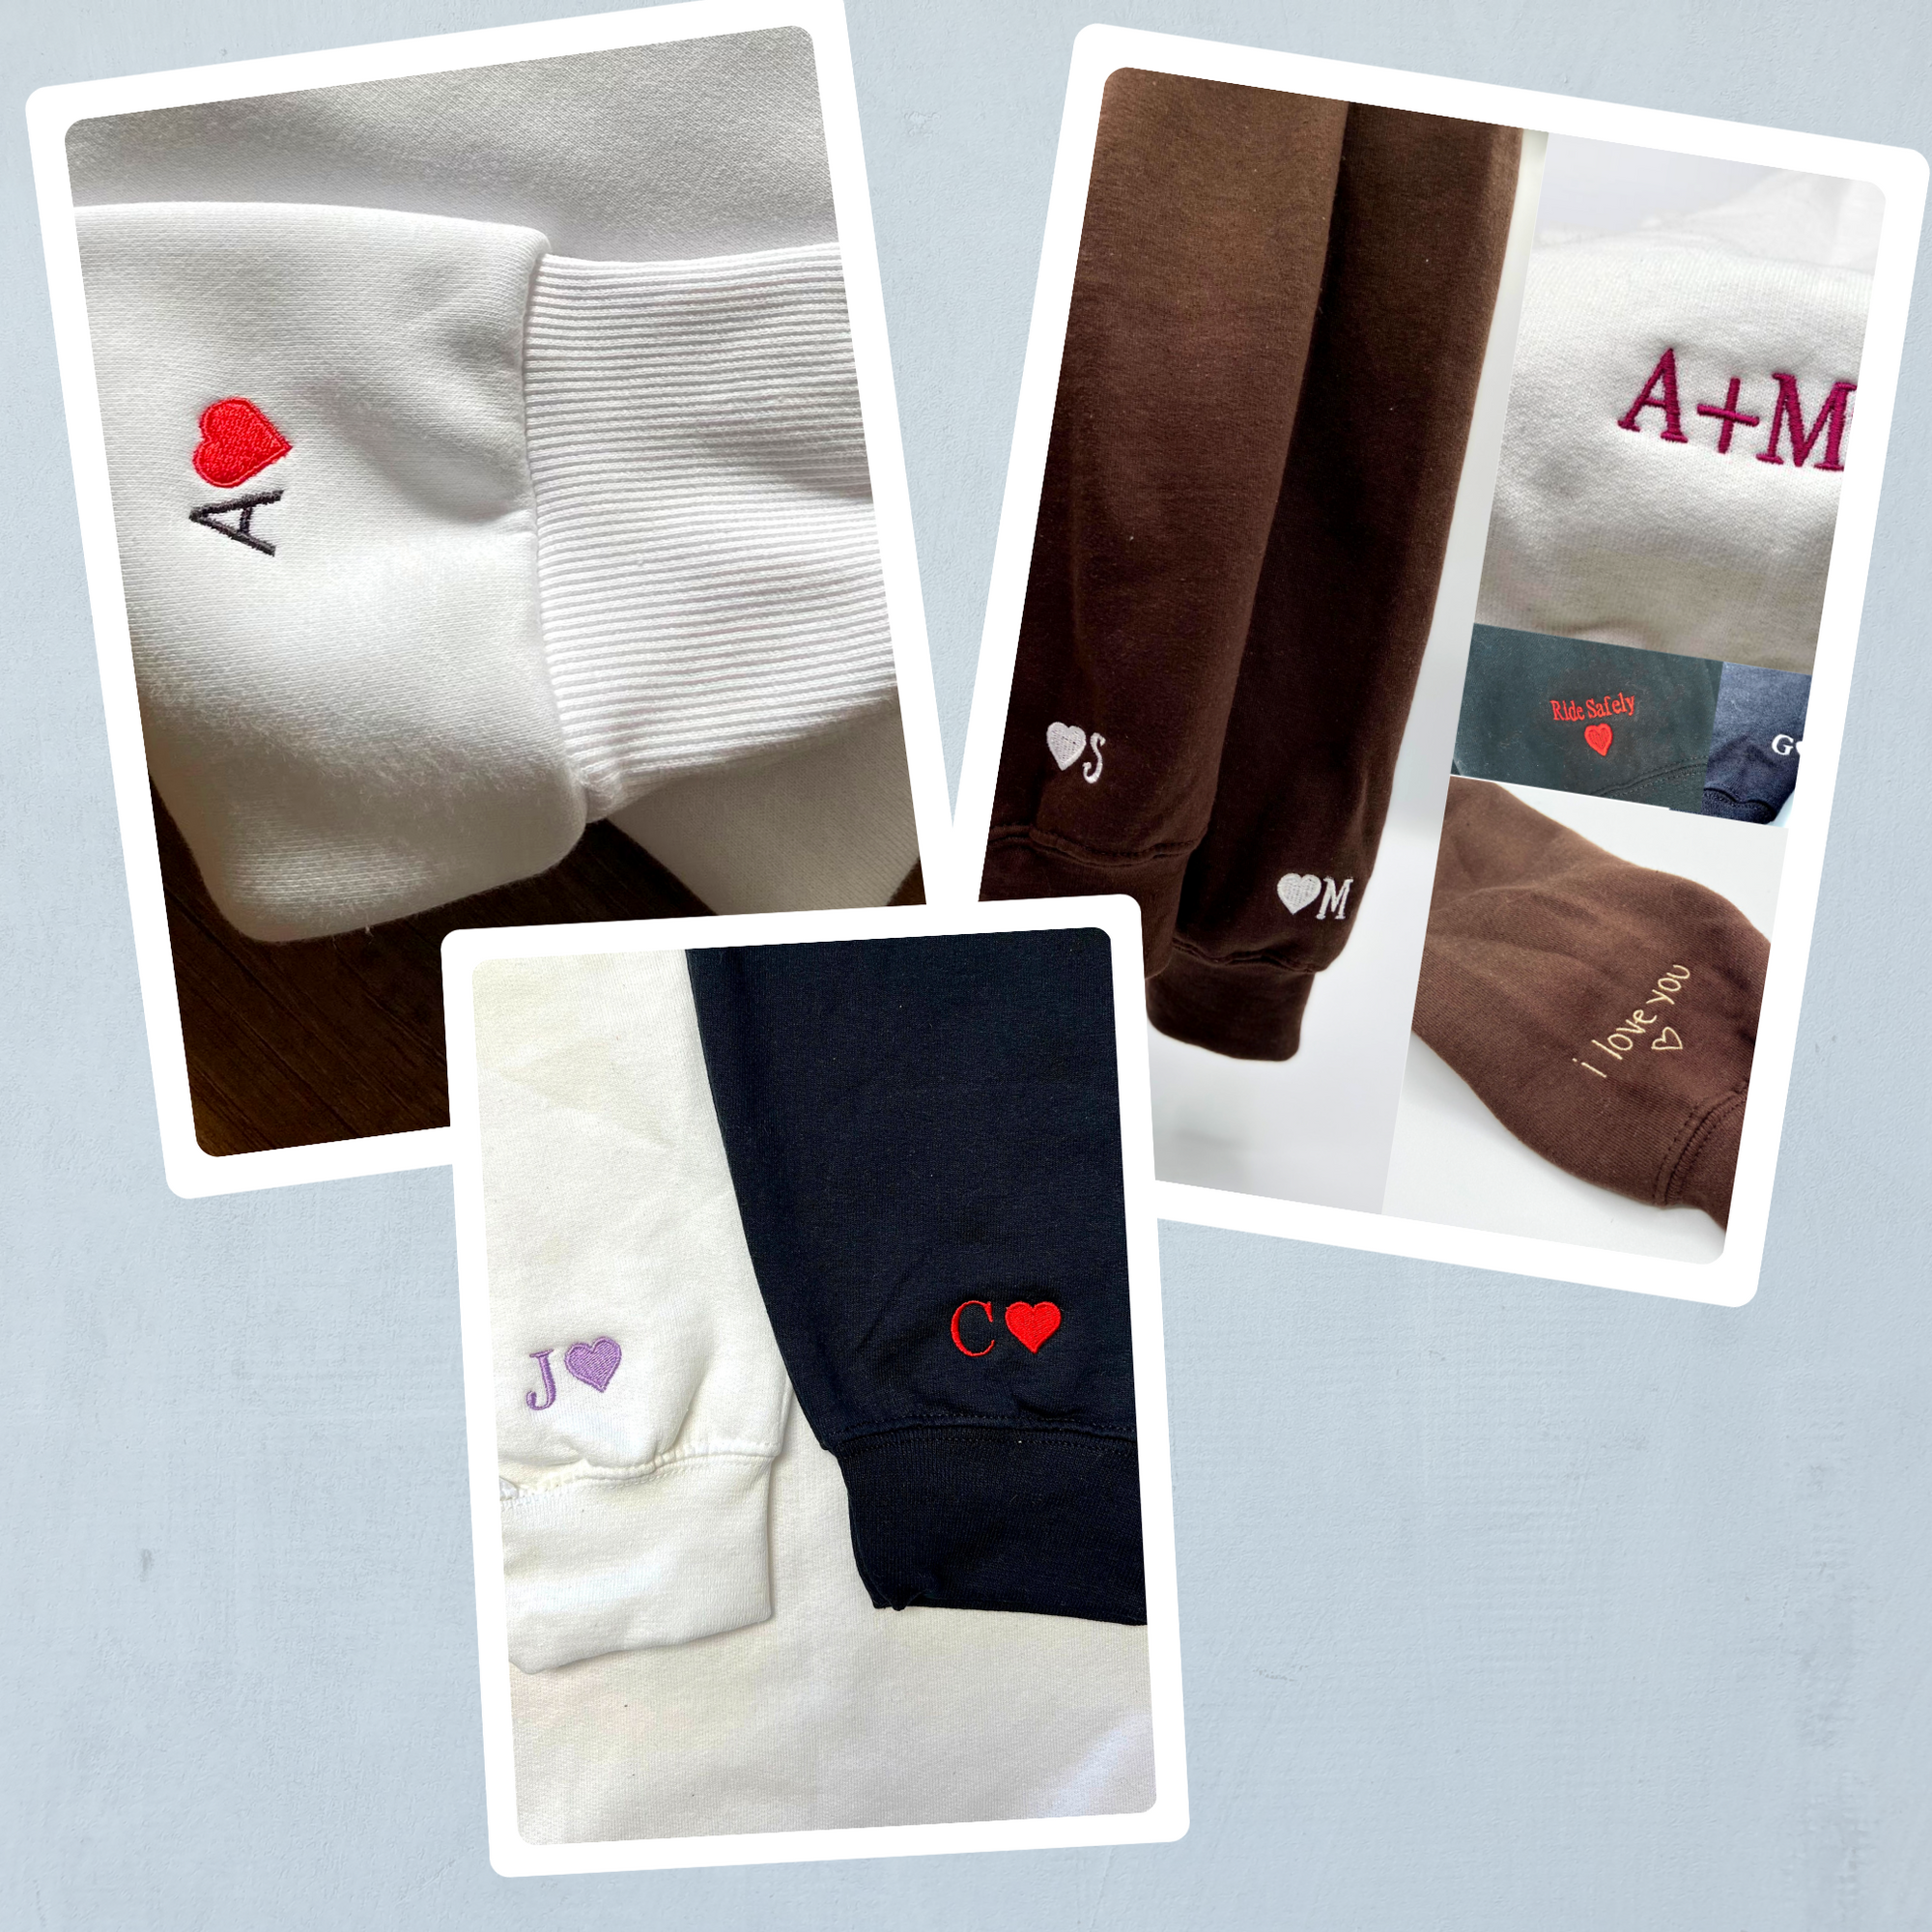 Custom Embroidered Hoodies For Couples, Personalized Couple Hoodies, His Her Hoodies, Cute Stitch Couples Embroidered Hoodie